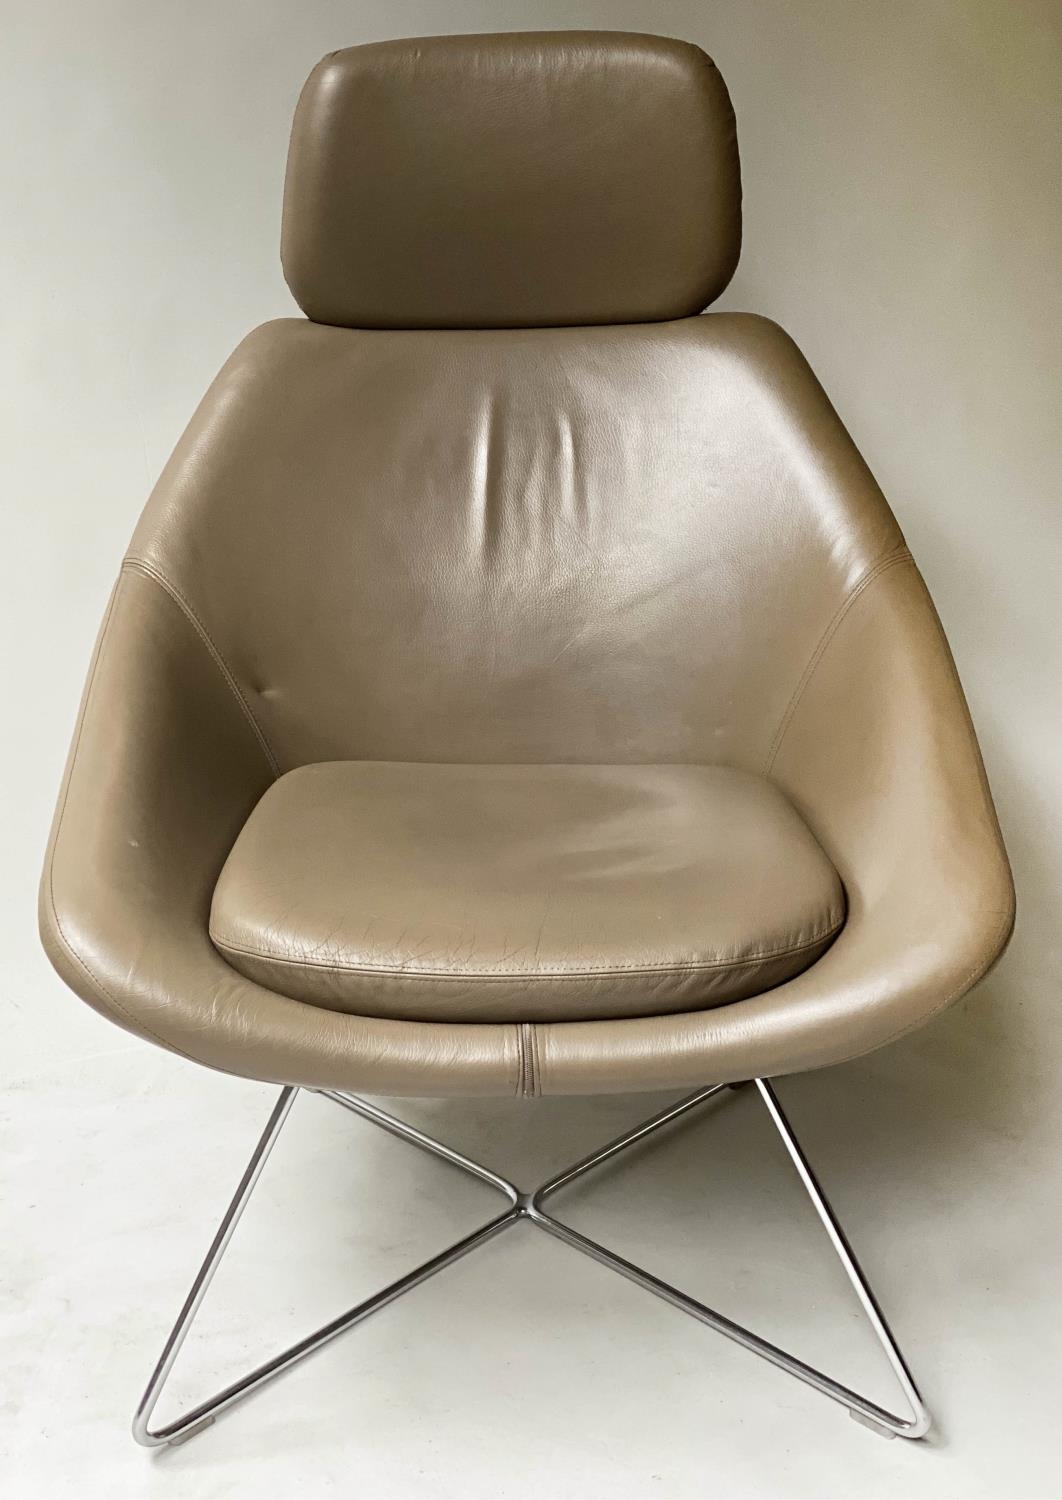 ALLERMUIR HATELE ARMCHAIR, in taupe leather, with chromium frame. 747cm W - Image 5 of 5